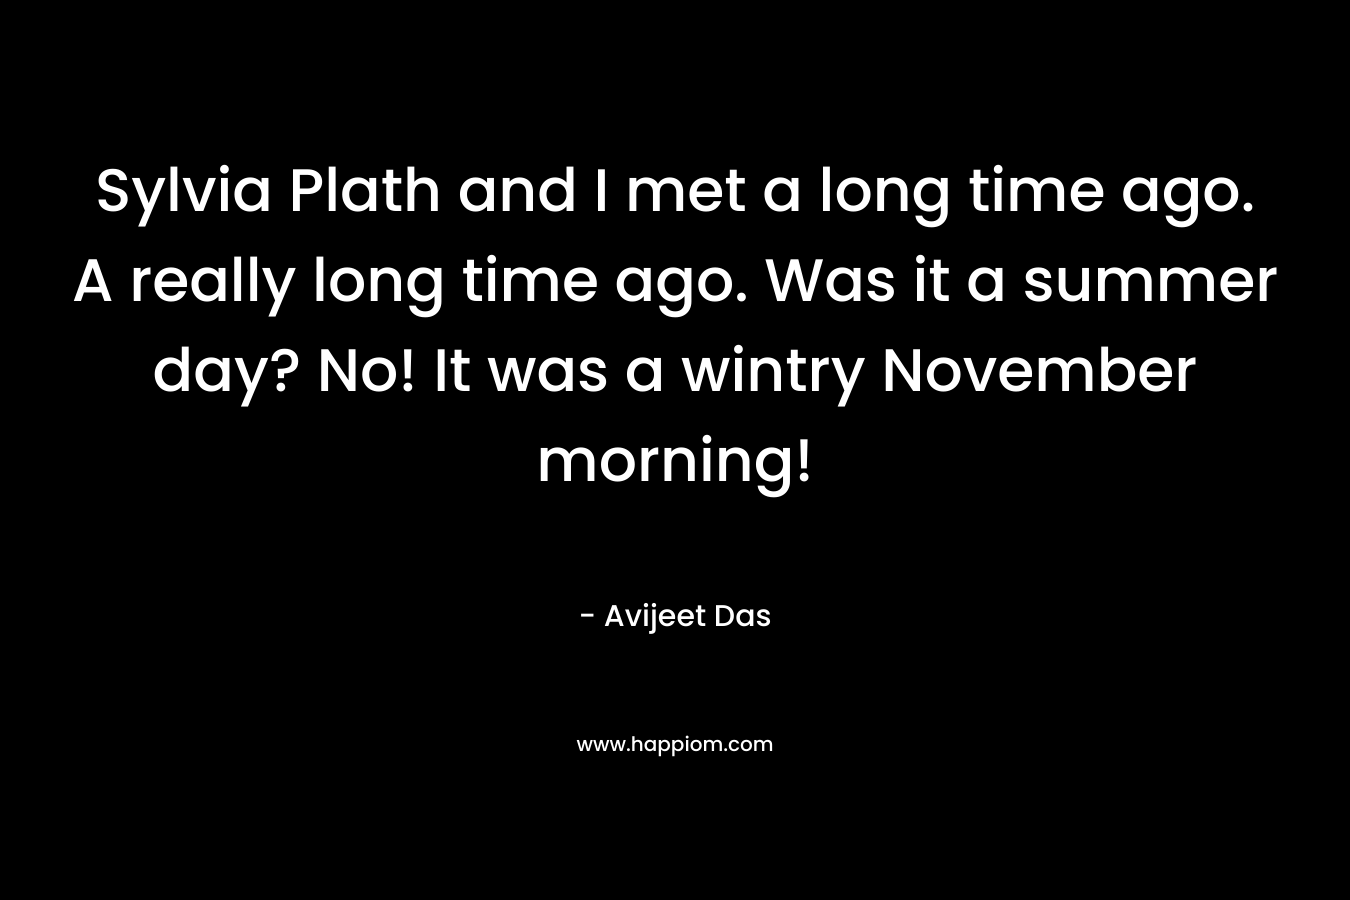 Sylvia Plath and I met a long time ago. A really long time ago. Was it a summer day? No! It was a wintry November morning!